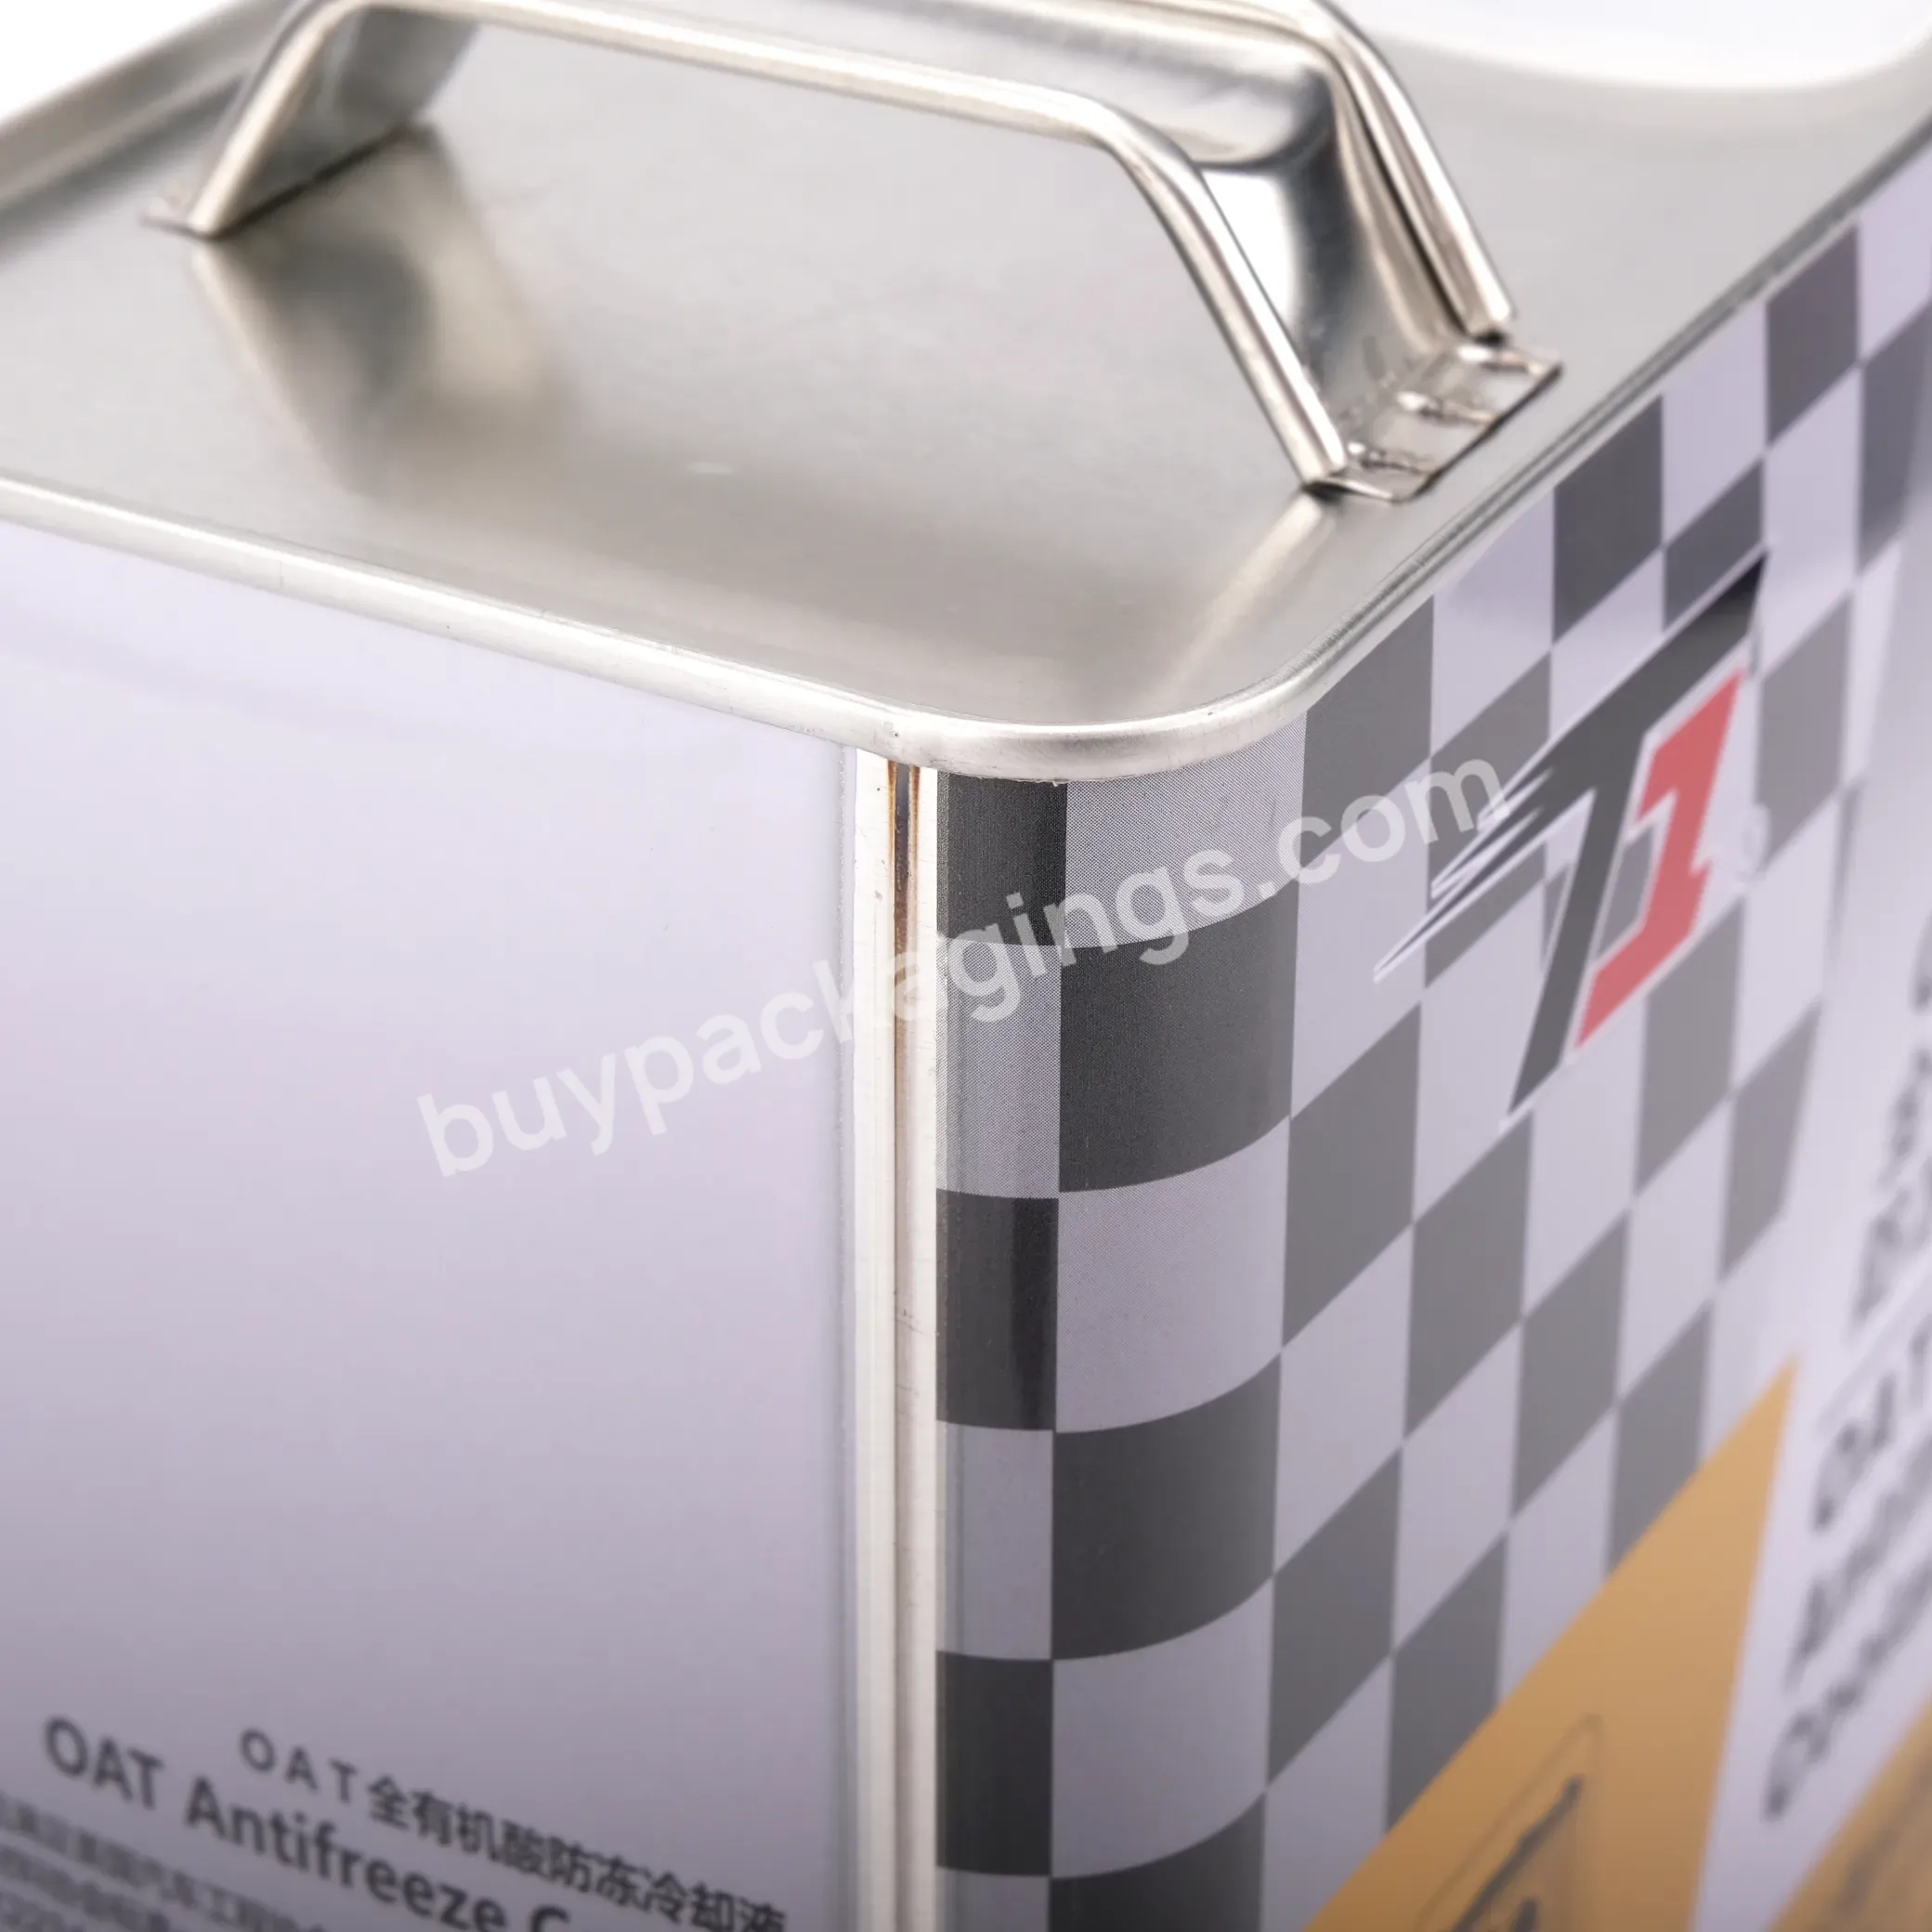 Rectangular F-style 1l 4l 5l Square Metal Tin Oil Cans With Japanese Cover Used For Petrol Oil Chemicals China Manufacturer - Buy Rectangular F-style With Japanese Cover,1 Gallon Metal Packing Bucket Square Oil Tin Can,1l 4l 5l Square Metal Tin Oil Cans.